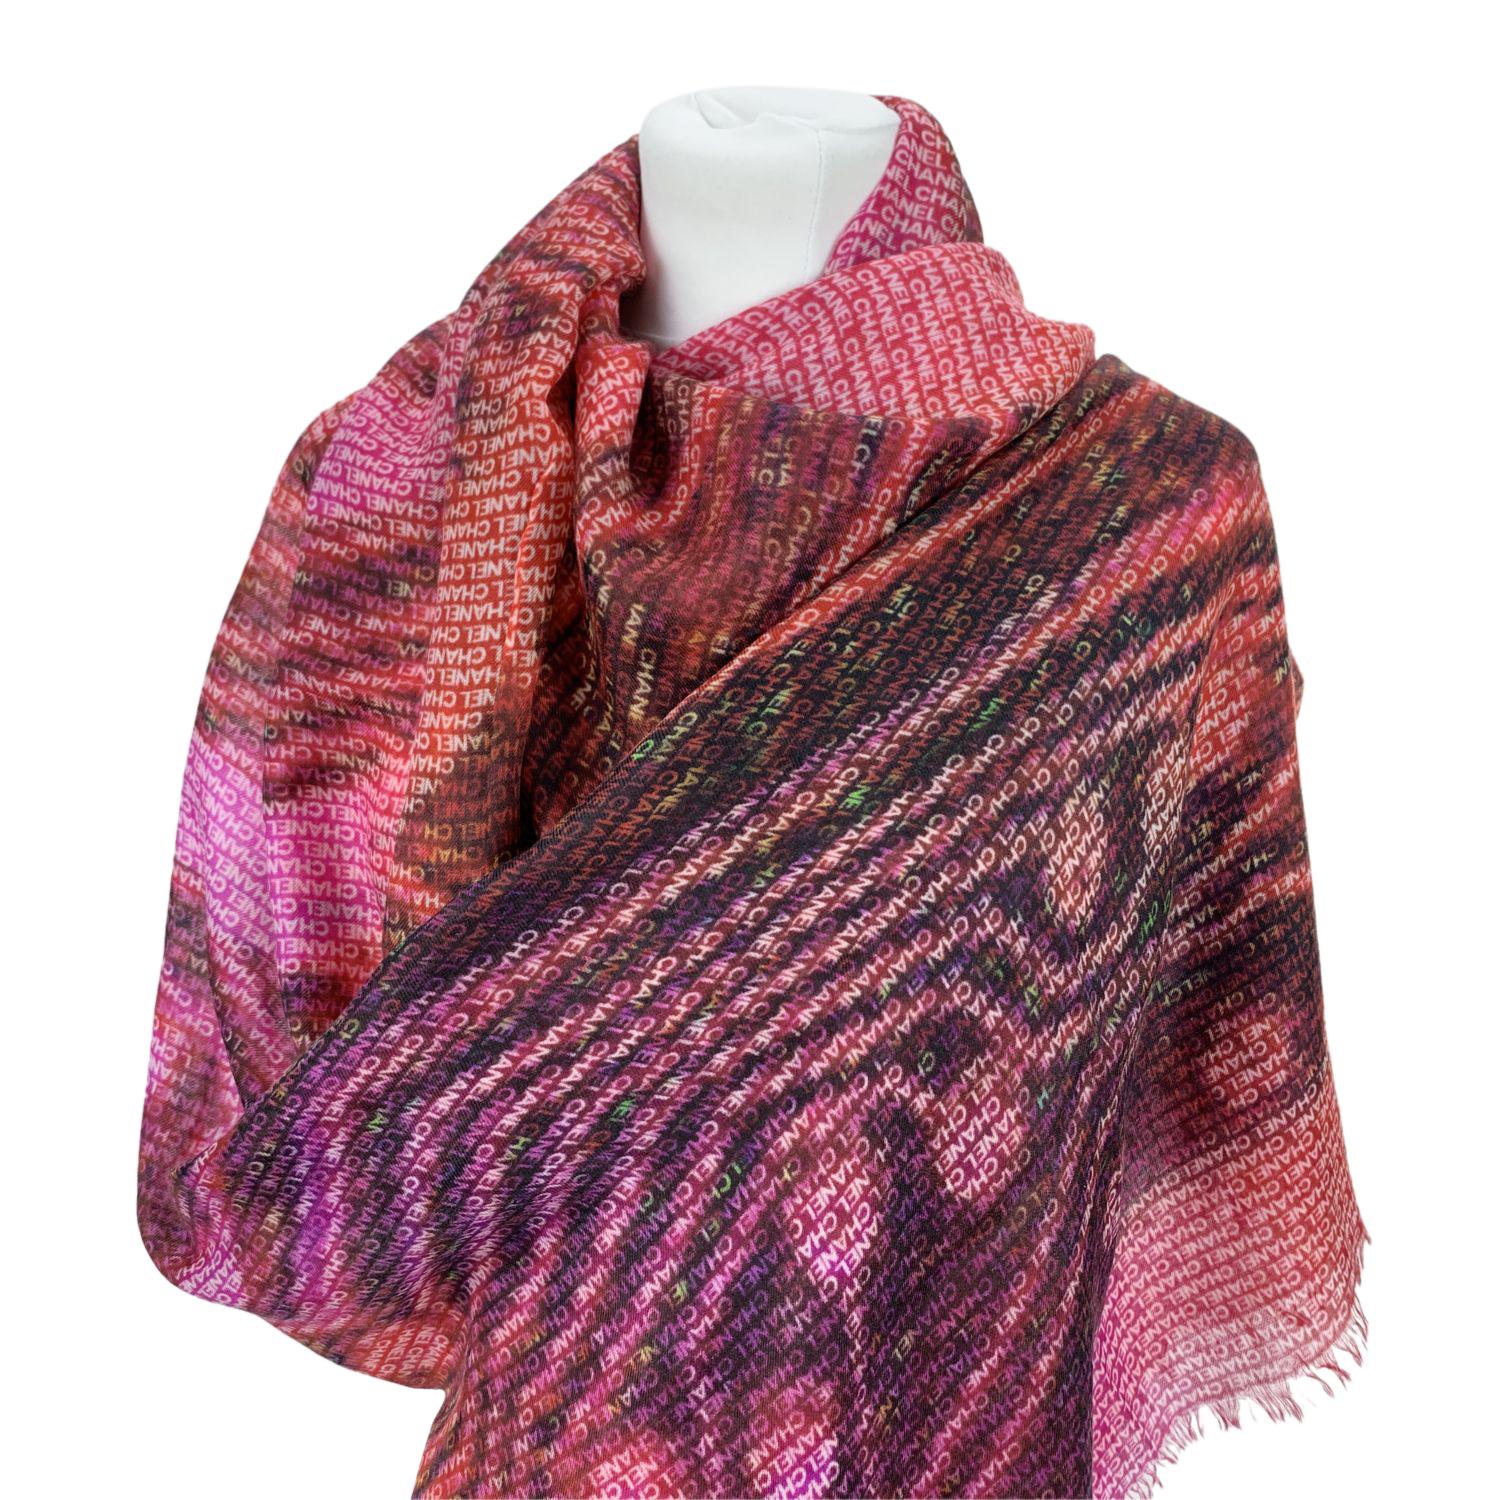 Chanel cashmere large scarf with and allover Chanel signature print in red and purple color. Frayed edges. Composition: 100% Cashmere. Measurements: 79 x 54 inches - 200.7 cm x 137.16 cm. Made in Italy

Details

MATERIAL: Cashmere

COLOR: